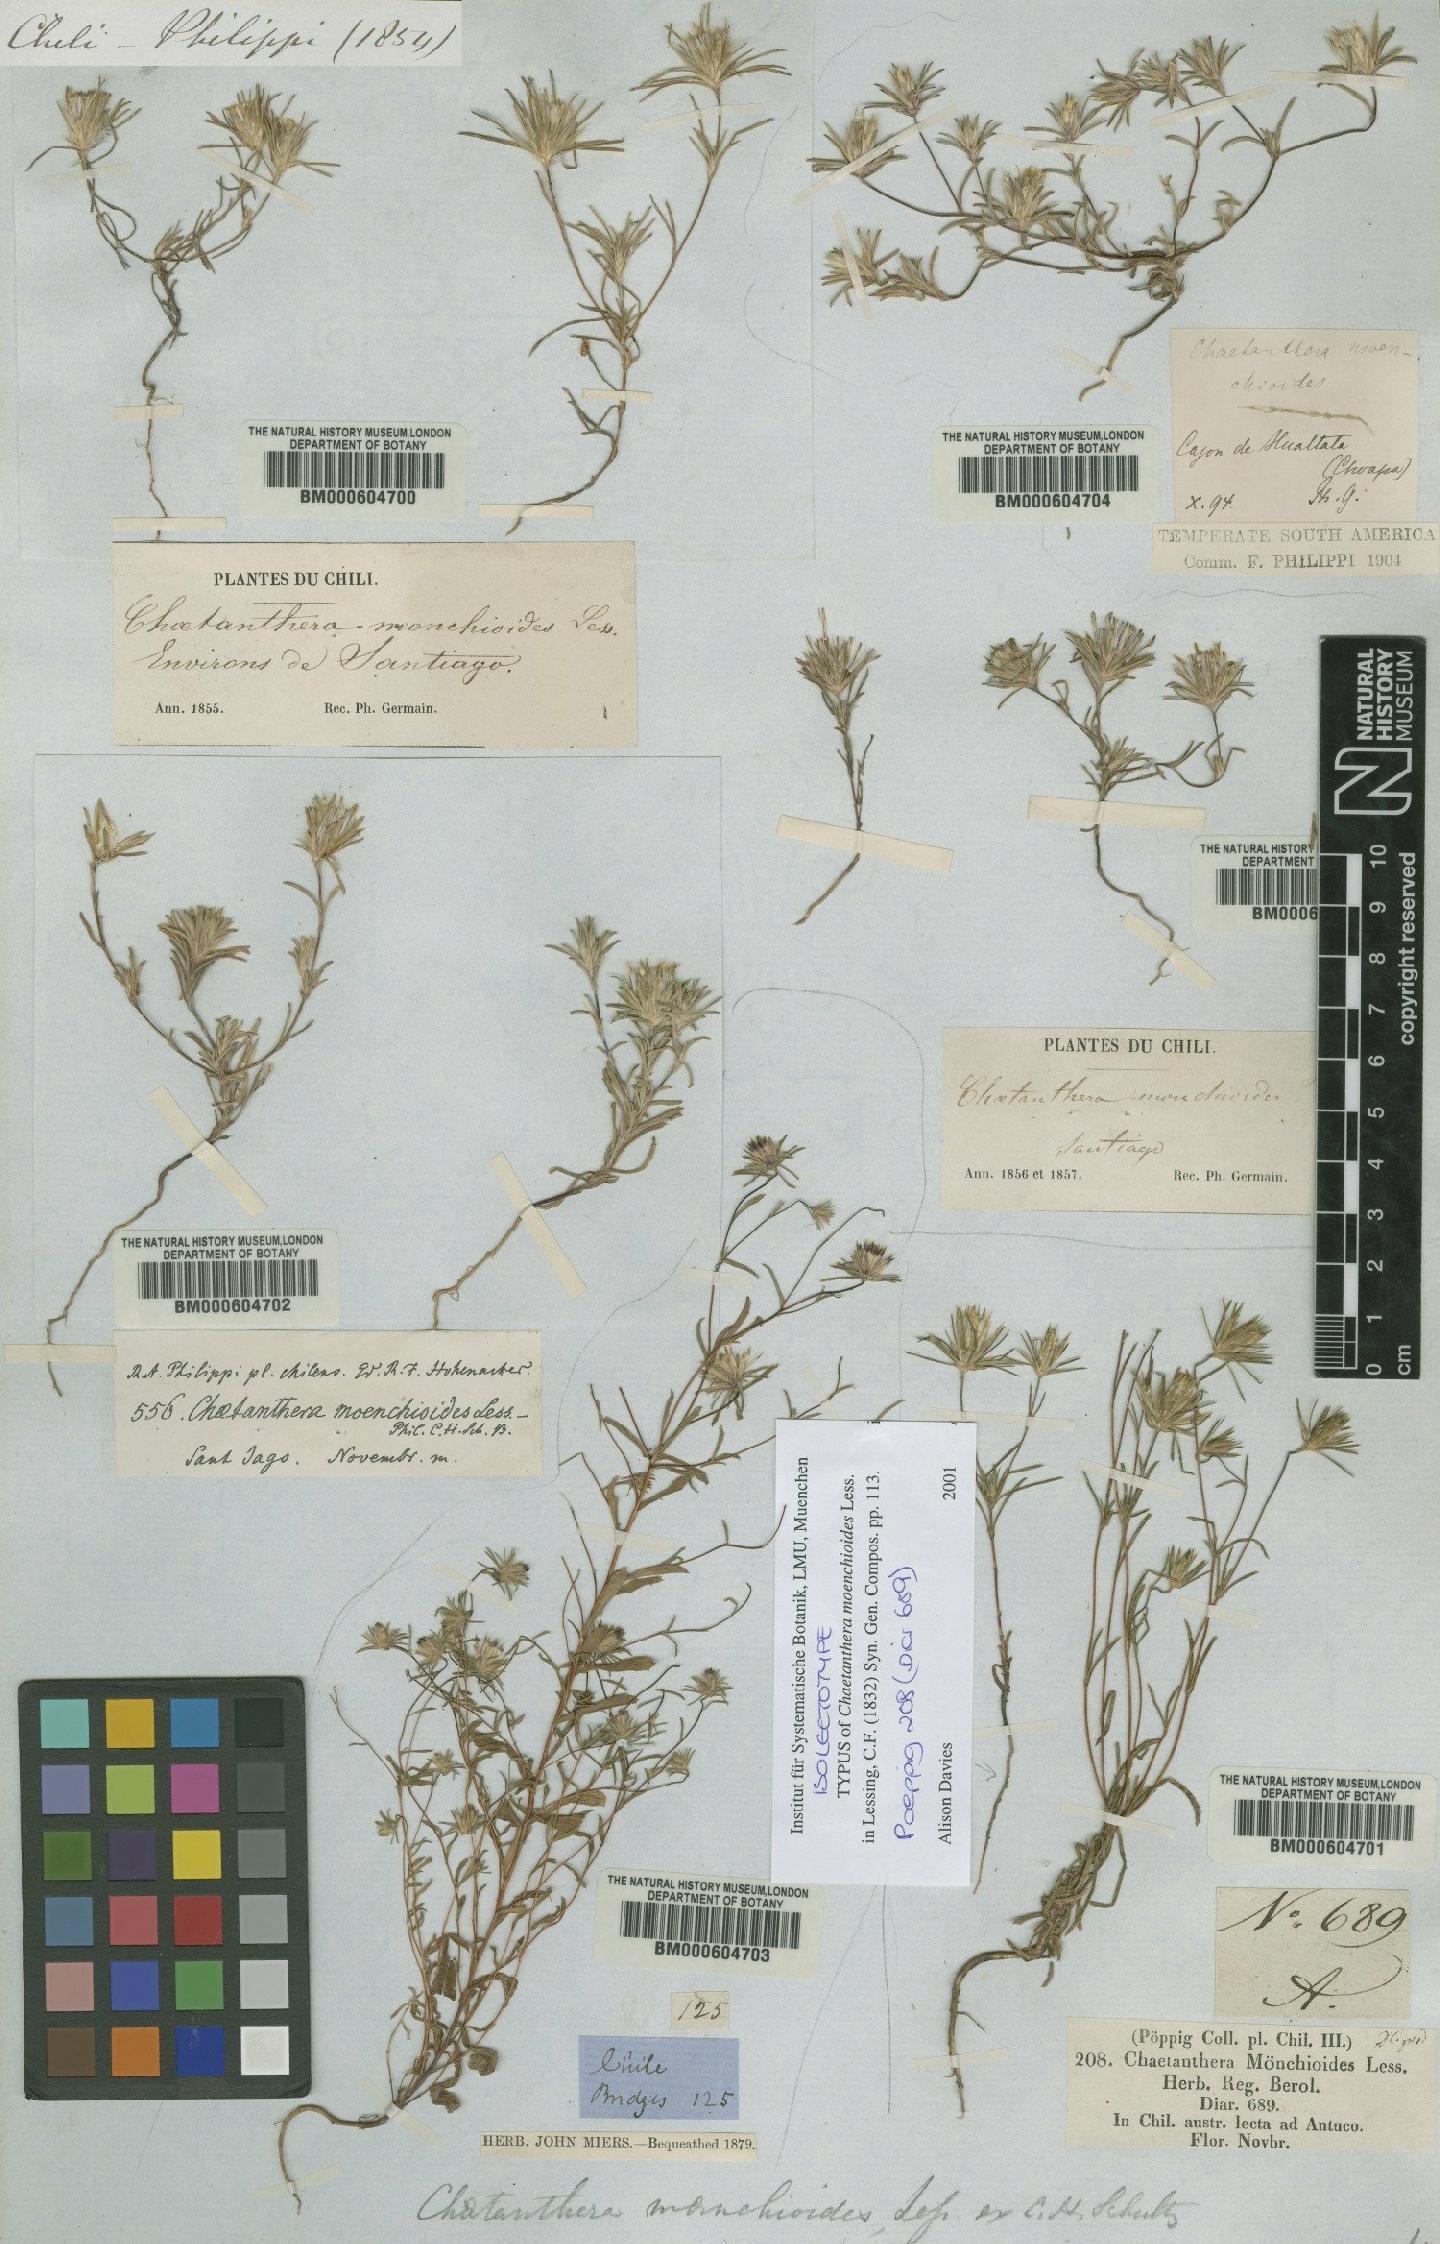 To NHMUK collection (Chaetanthera moenchioides Less.; NHMUK:ecatalogue:4683053)